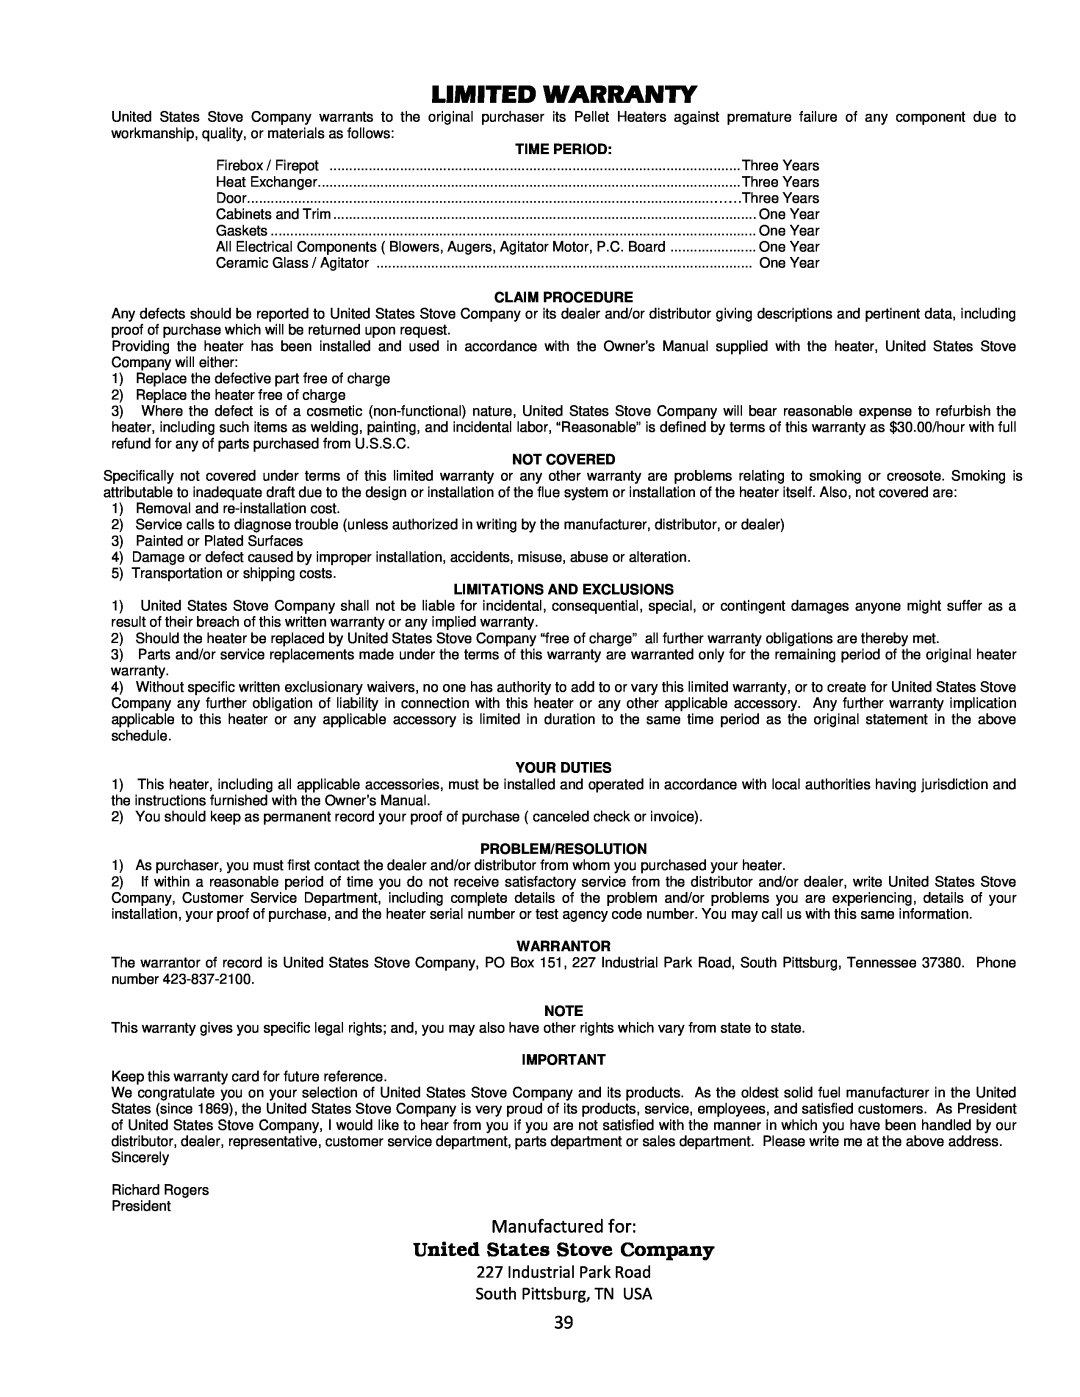 United States Stove 5660(I) manual Limited Warranty, United States Stove Company, Time Period, Claim Procedure, Not Covered 